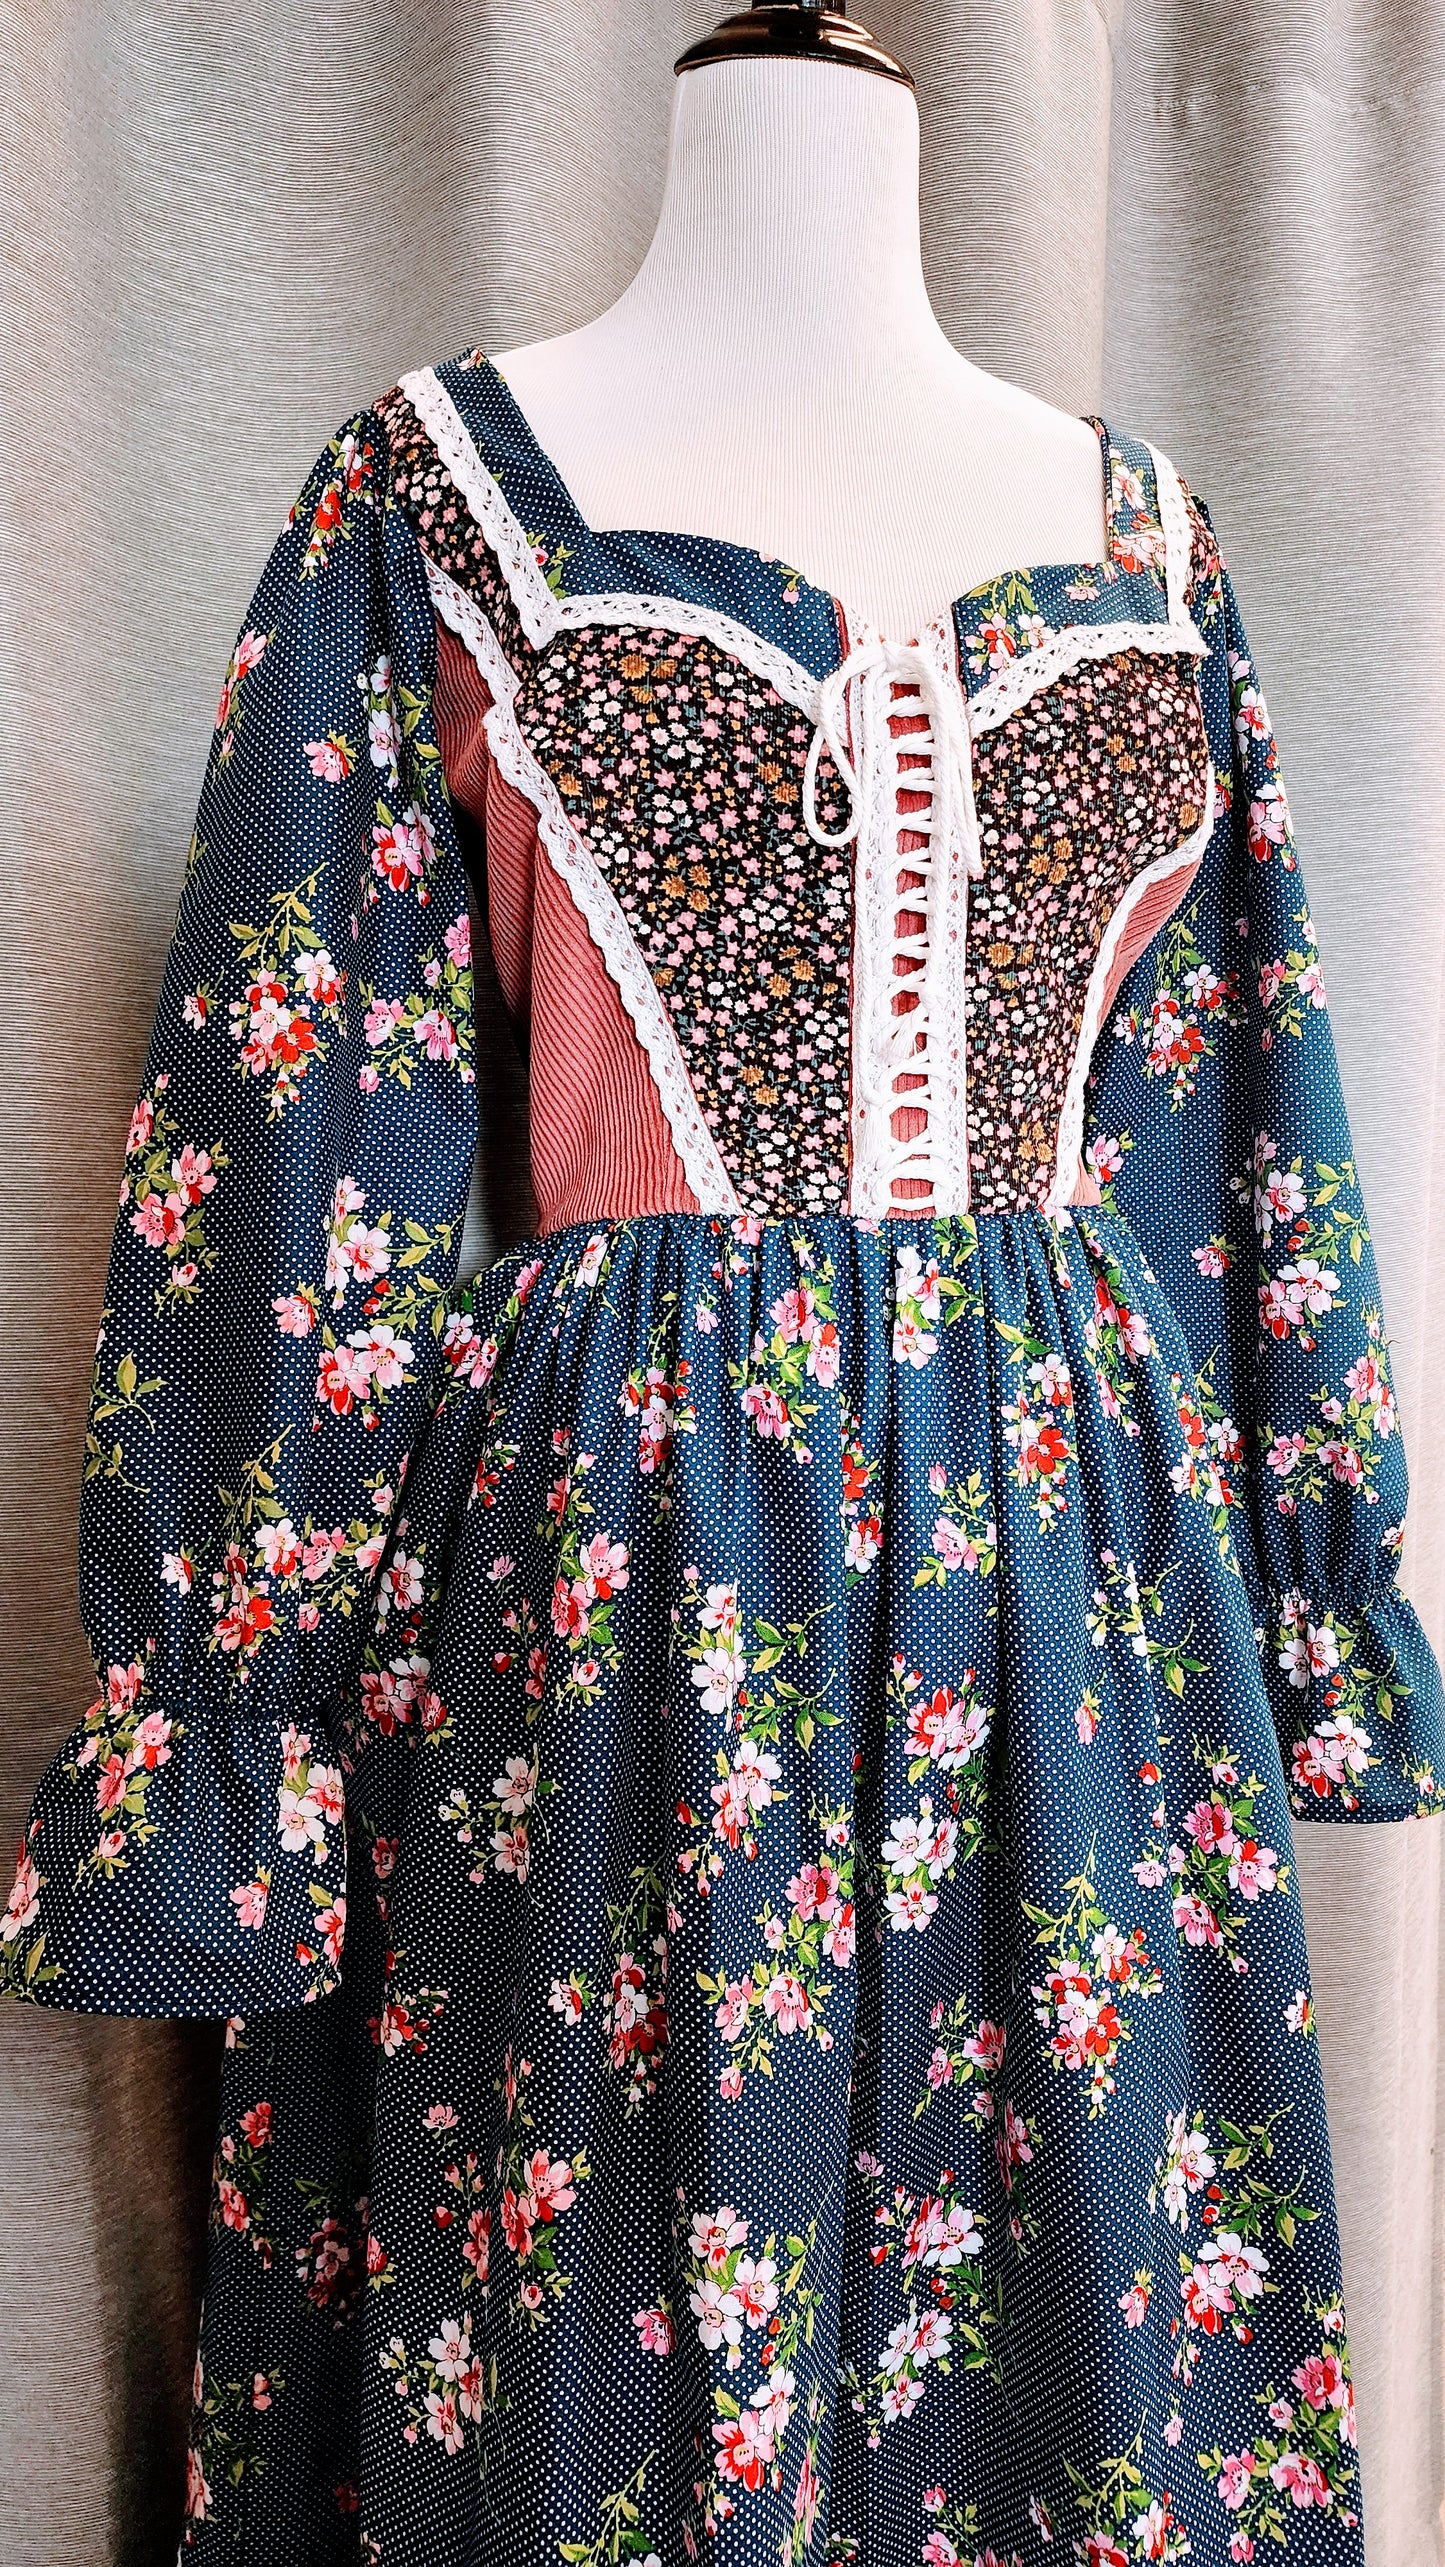 An Original Homespun 1970's Vintage Inspired Floral Print Corset Lace Dress by Hollyville